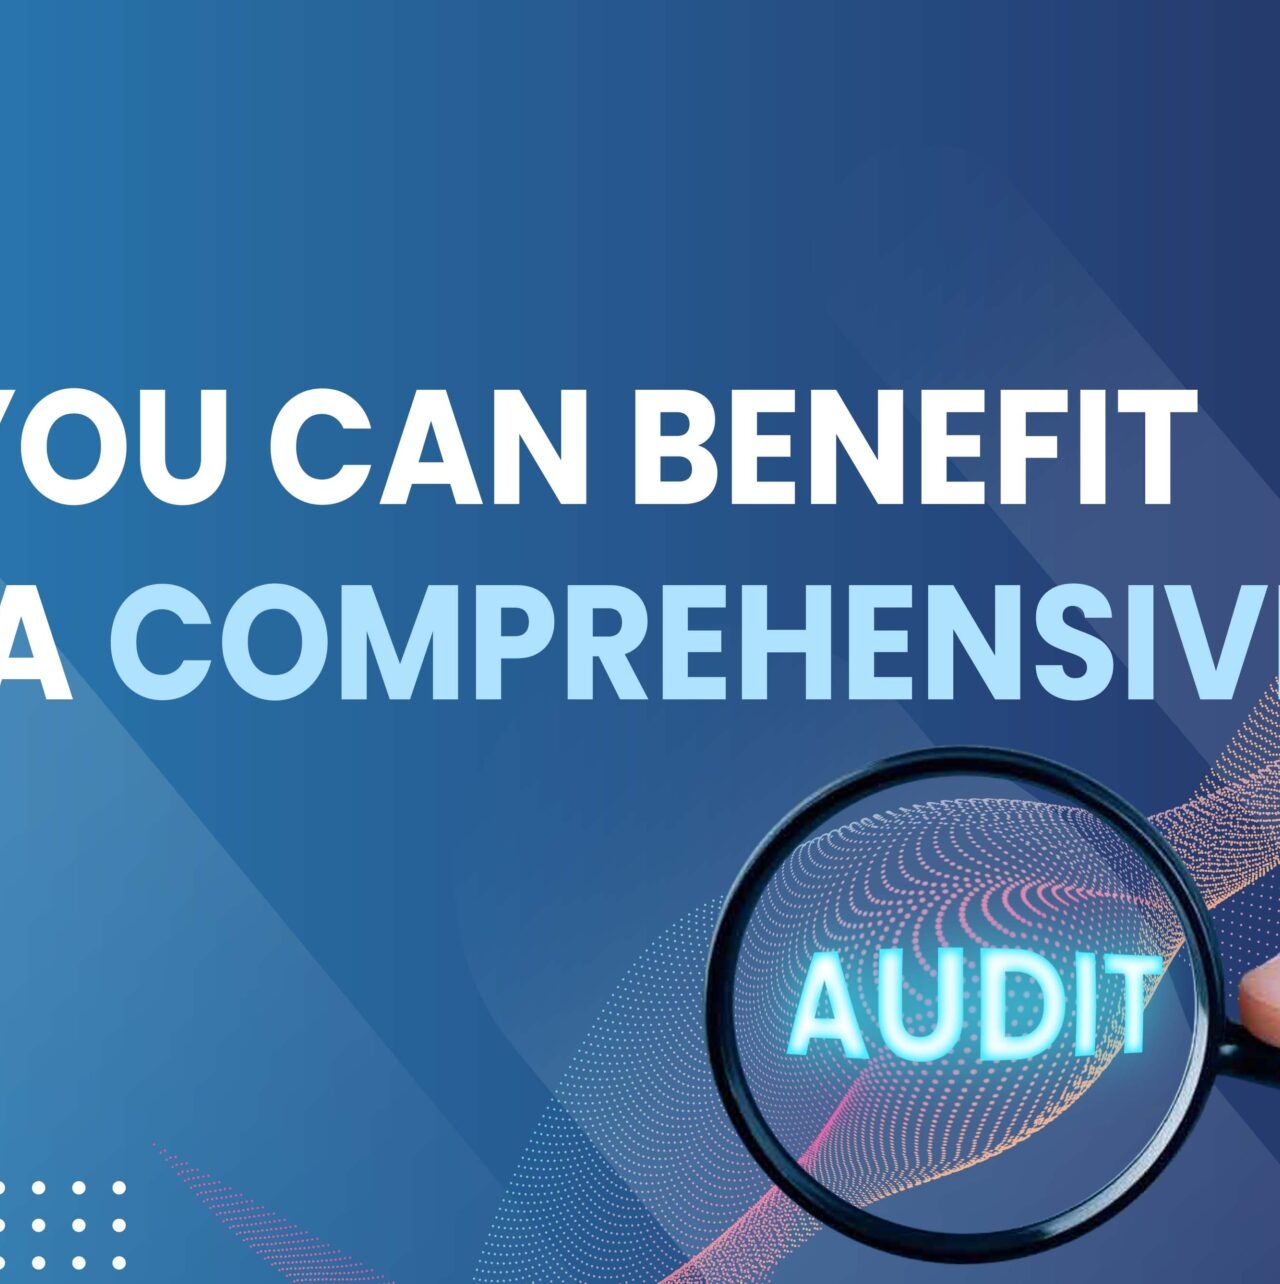 How you can benefit from a comprehensive audit